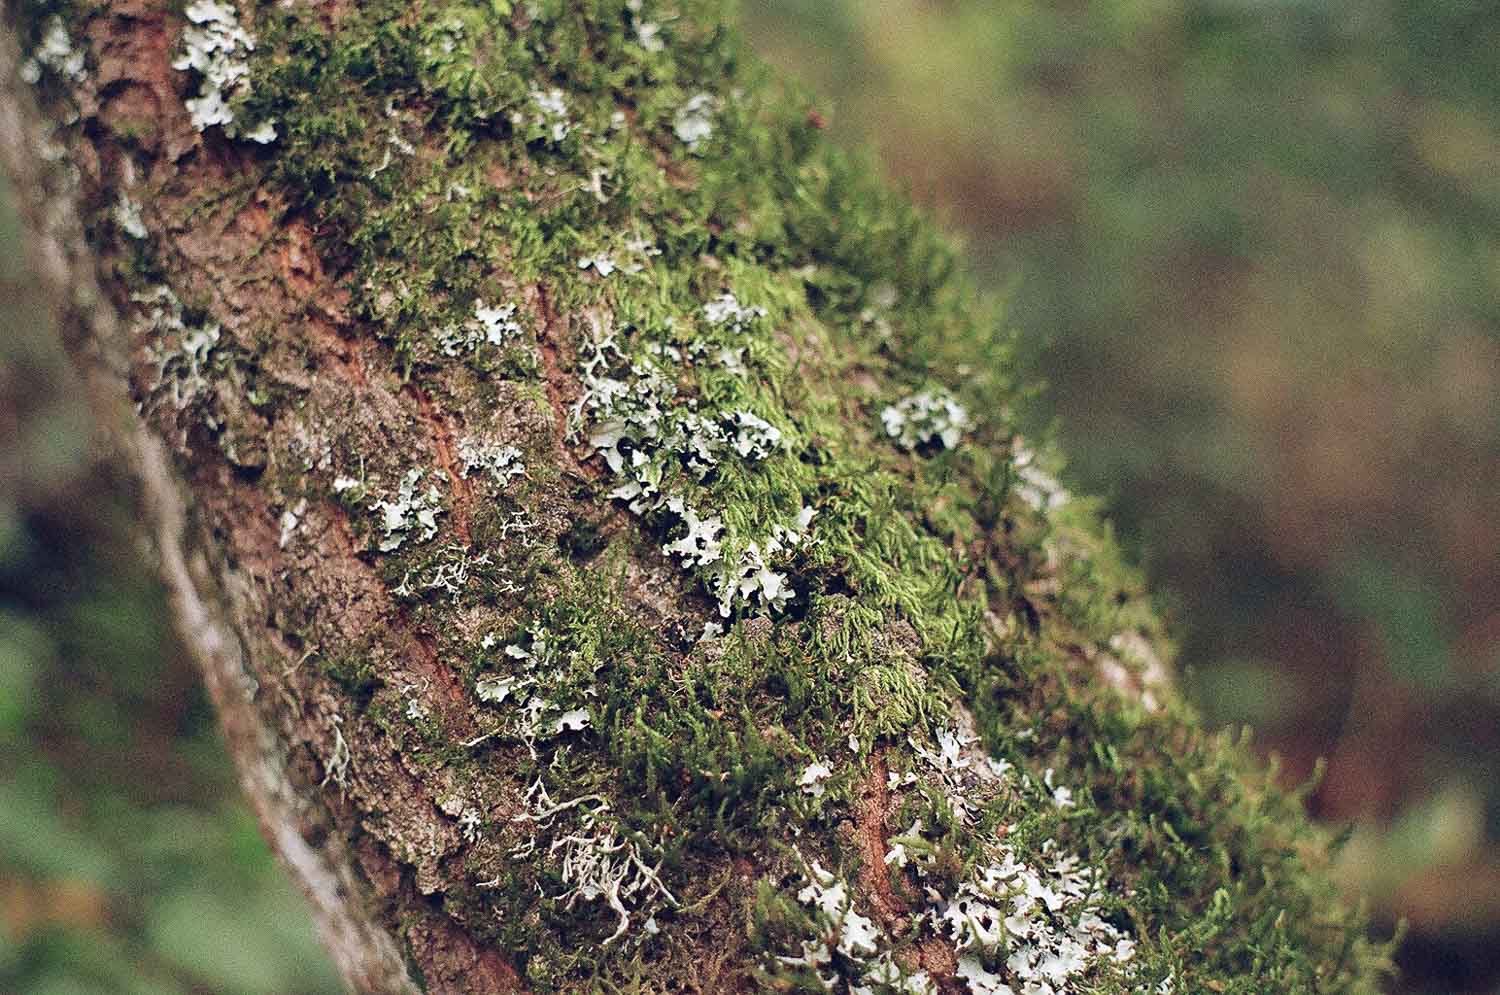 Close-up of moss and lichen growing on a tree bark.